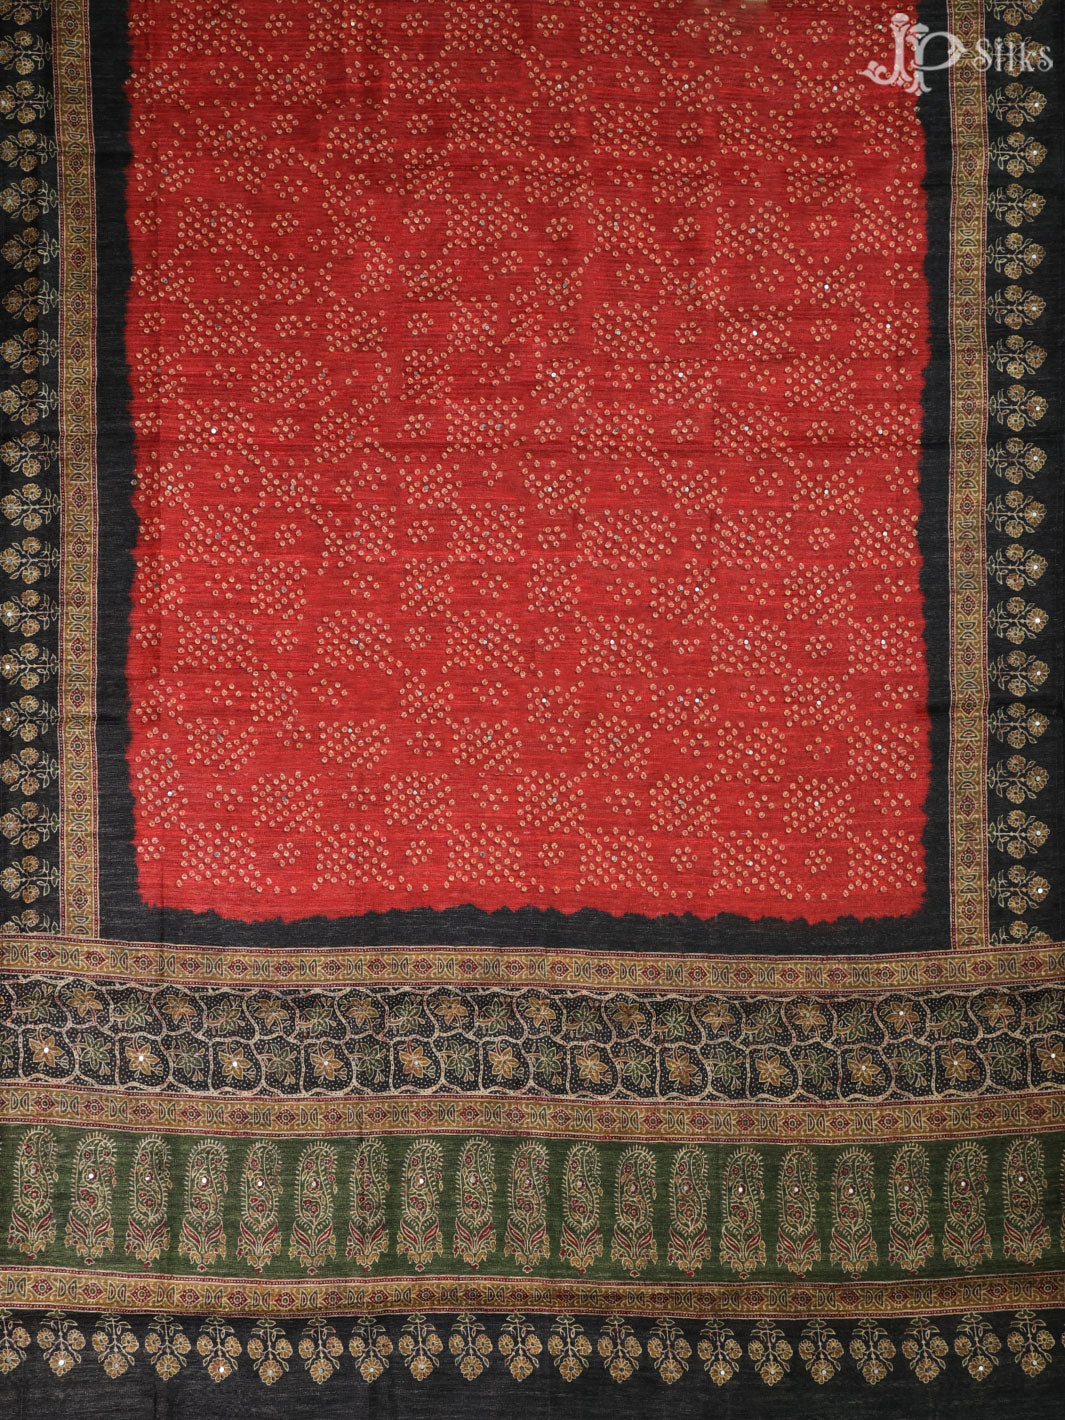 Red and Black Tussar Unstiched Chudidhar Material - E1449 - View 4